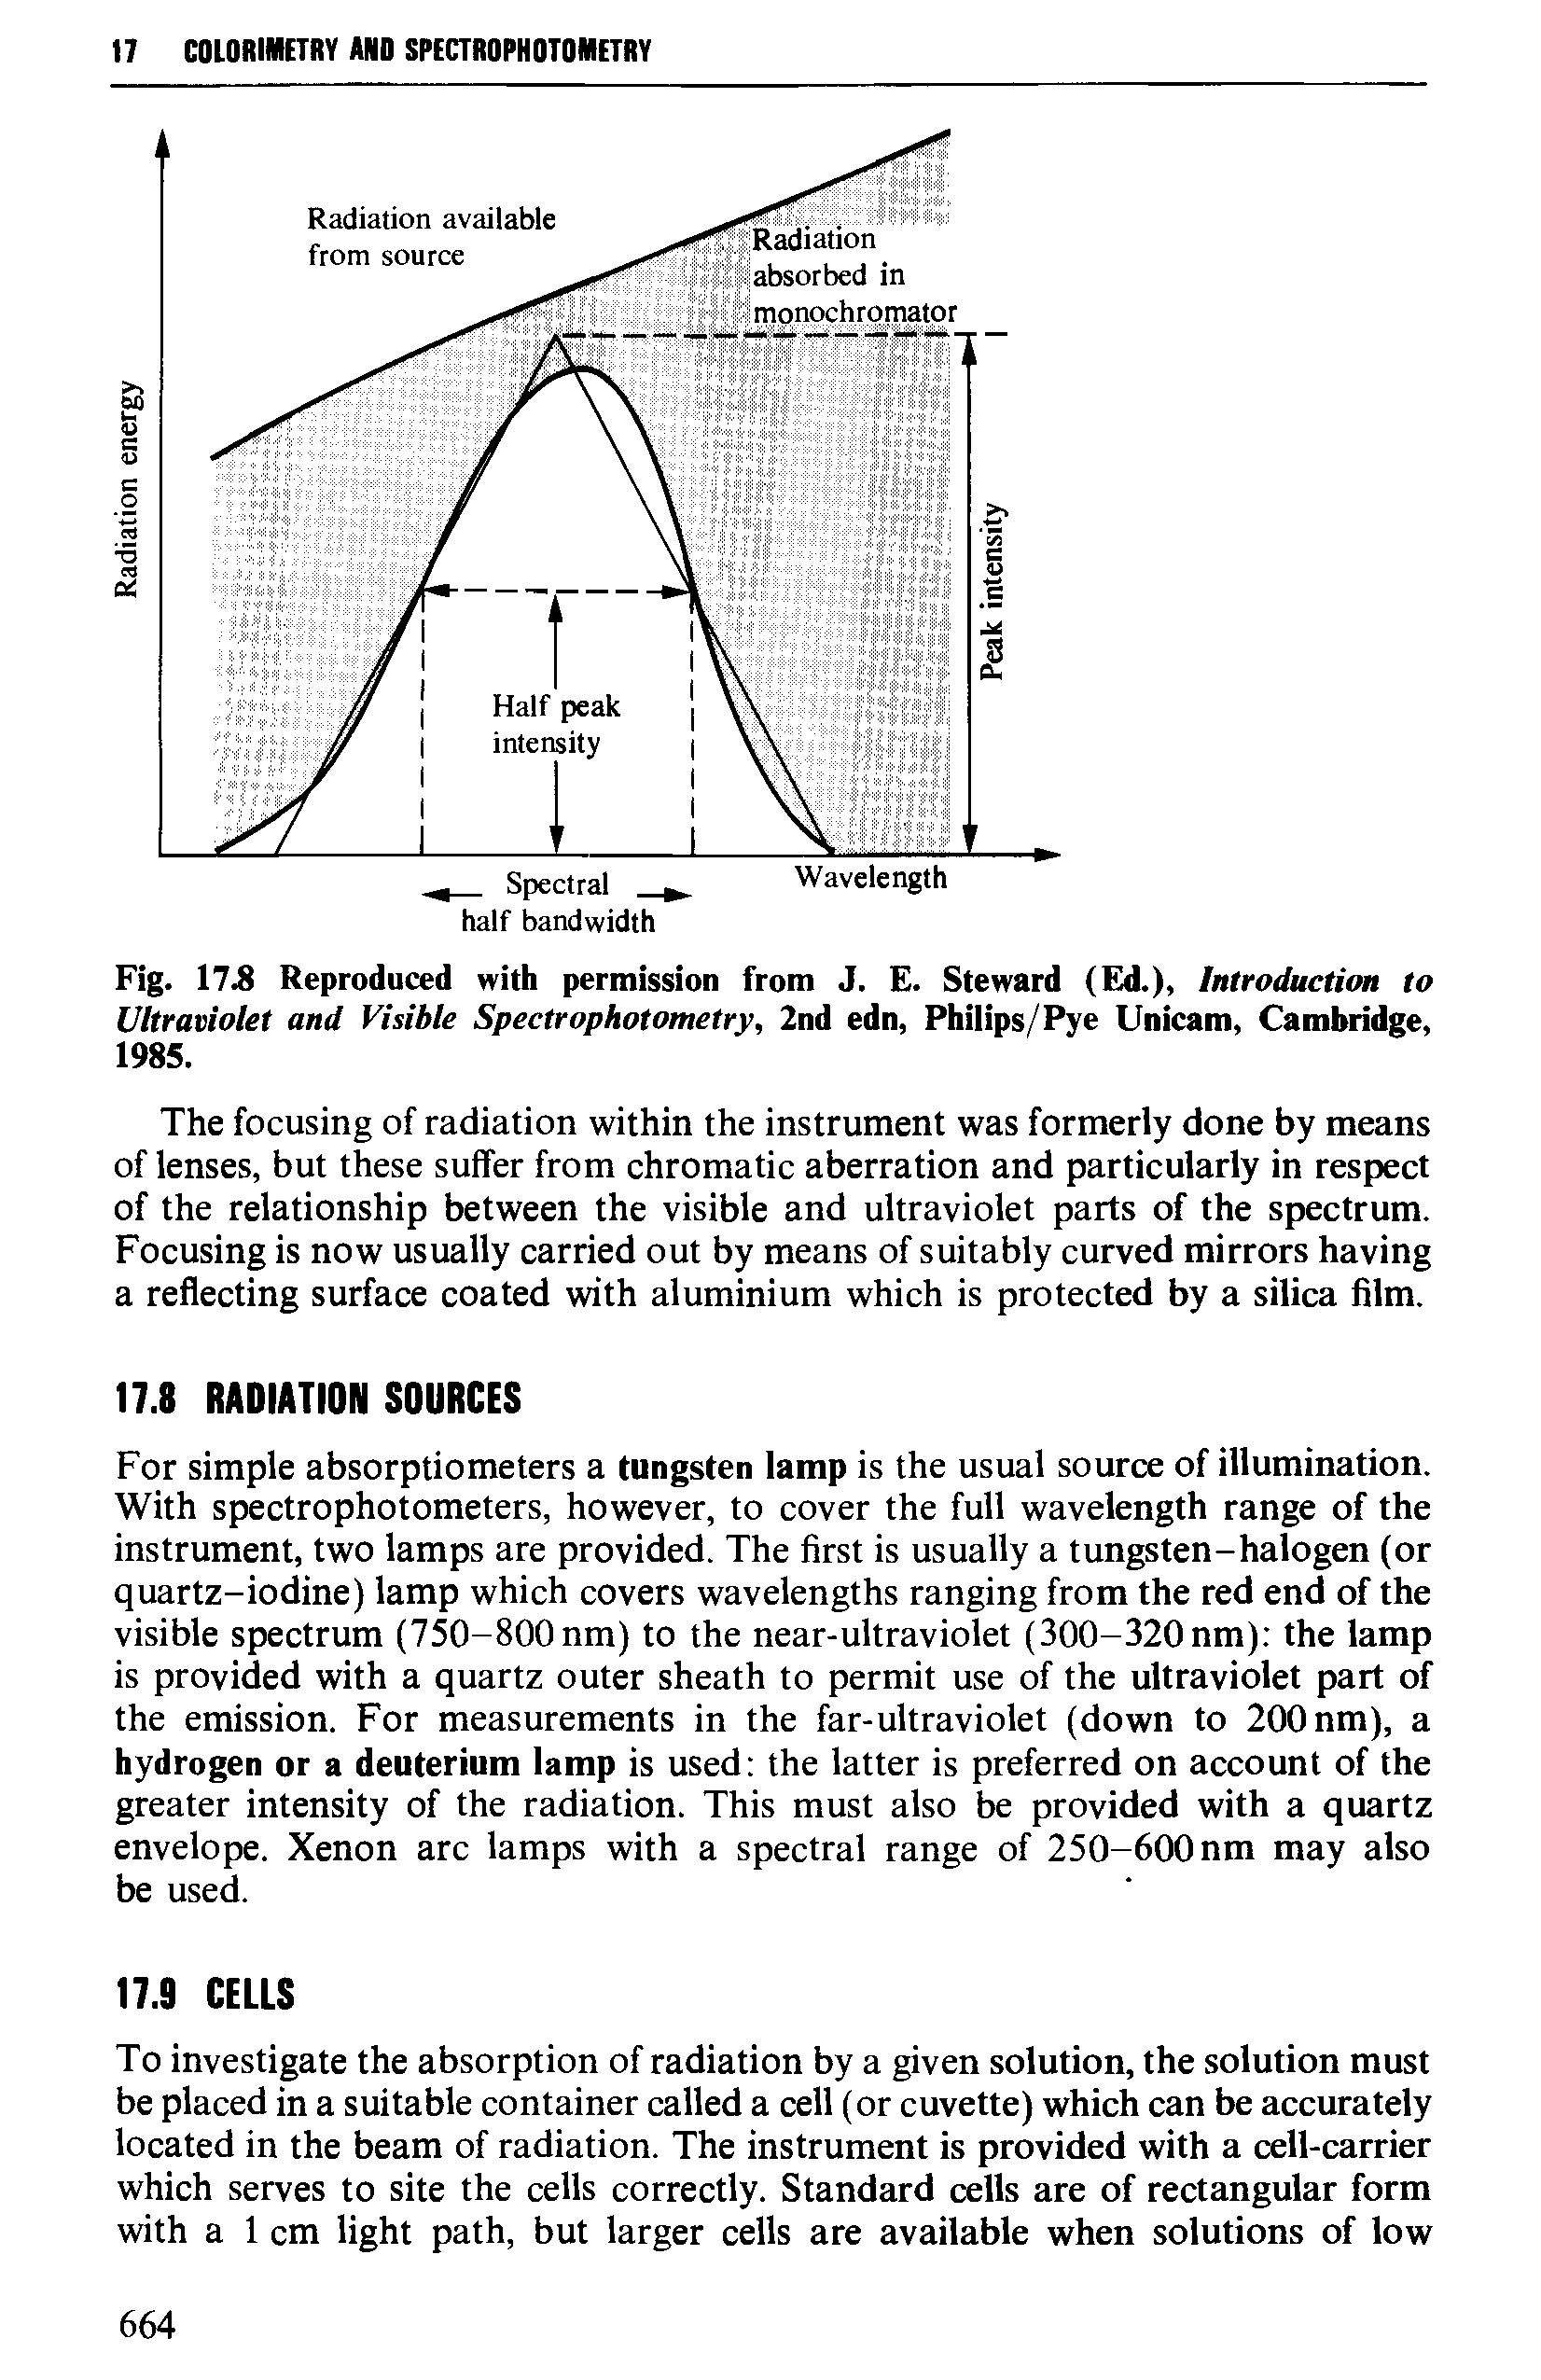 Fig. 17.8 Reproduced with permission from J. E. Steward (Ed.), Introduction to Ultraviolet and Visible Spectrophotometry, 2nd edn, Philips/Pye Unicam, Cambridge, 1985.